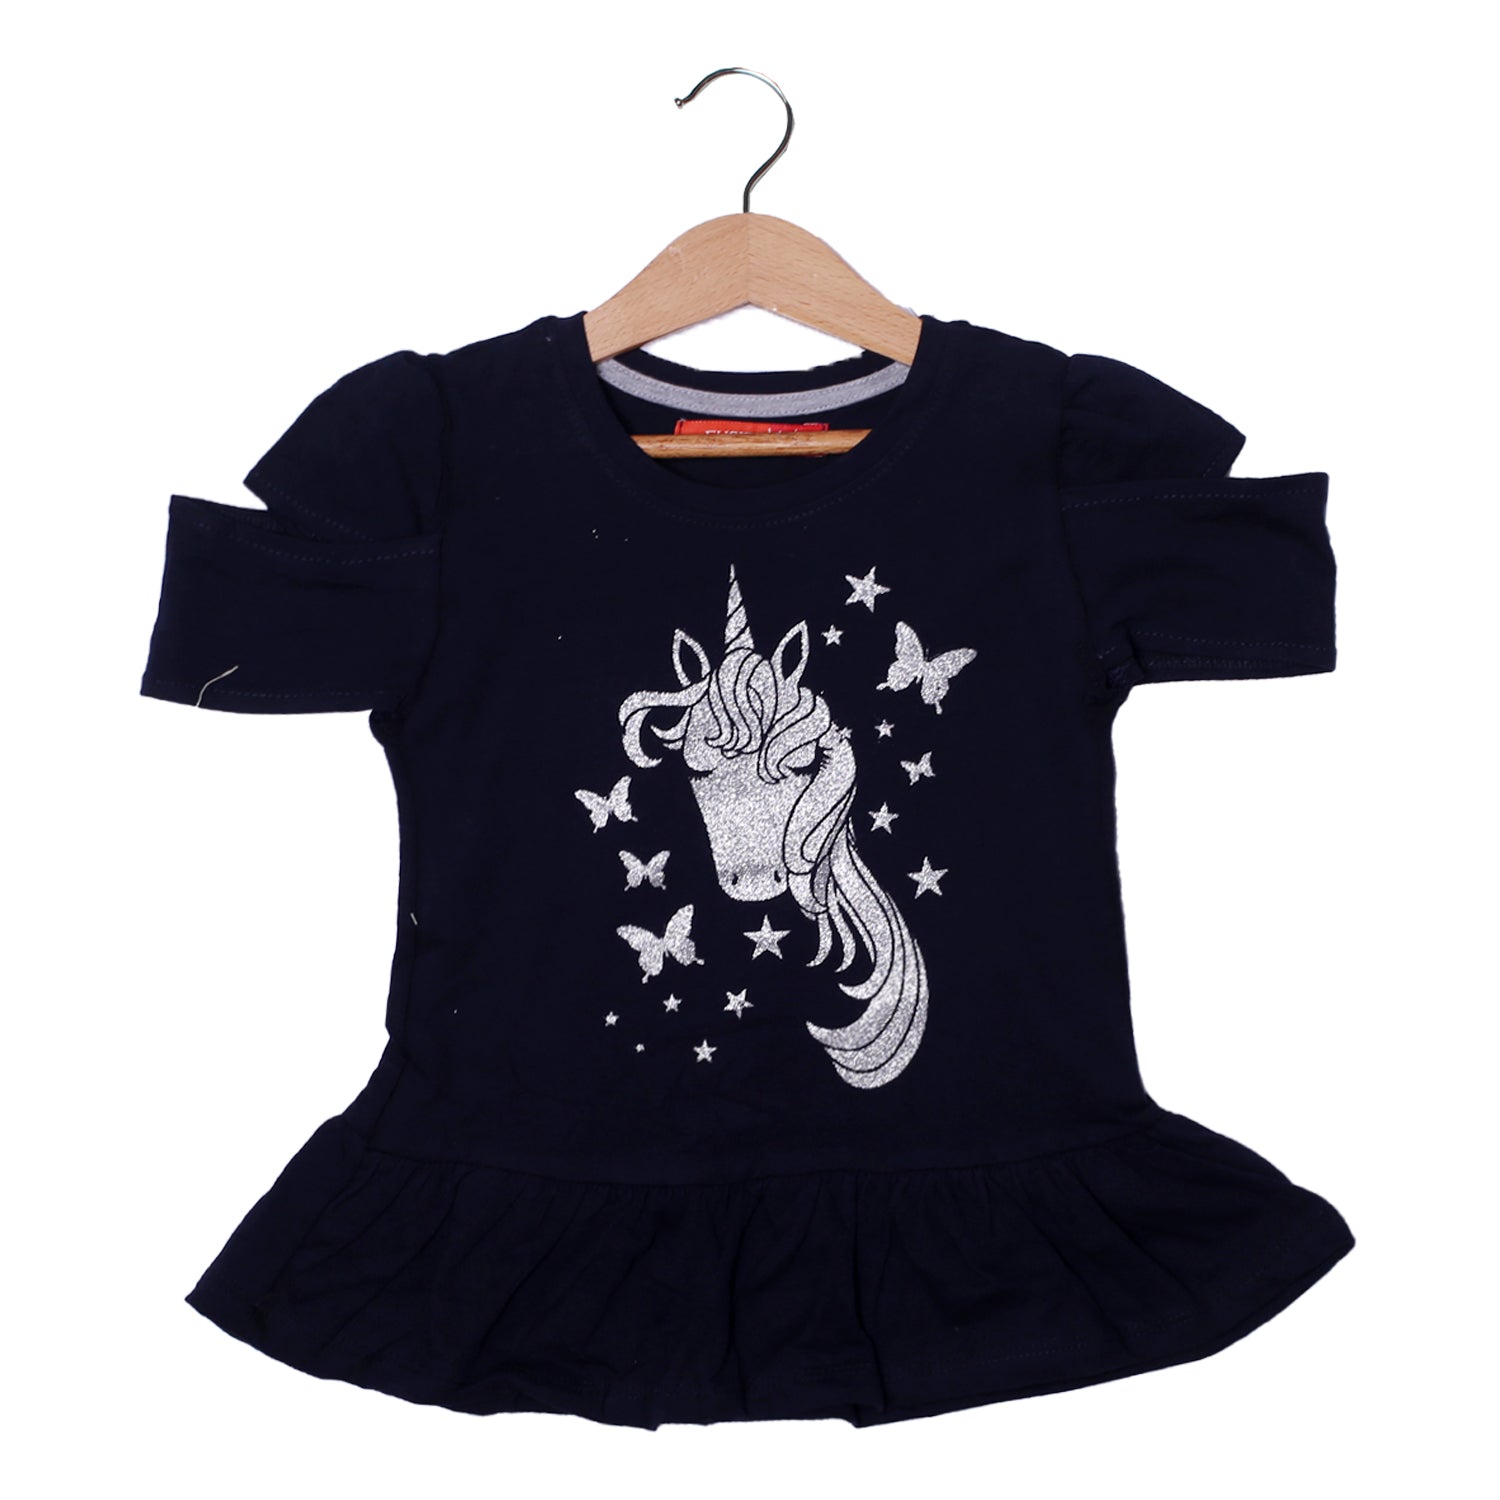 NEW NAVY BLUE UNICORN PRINTED T-SHIRT TOP FOR GIRLS